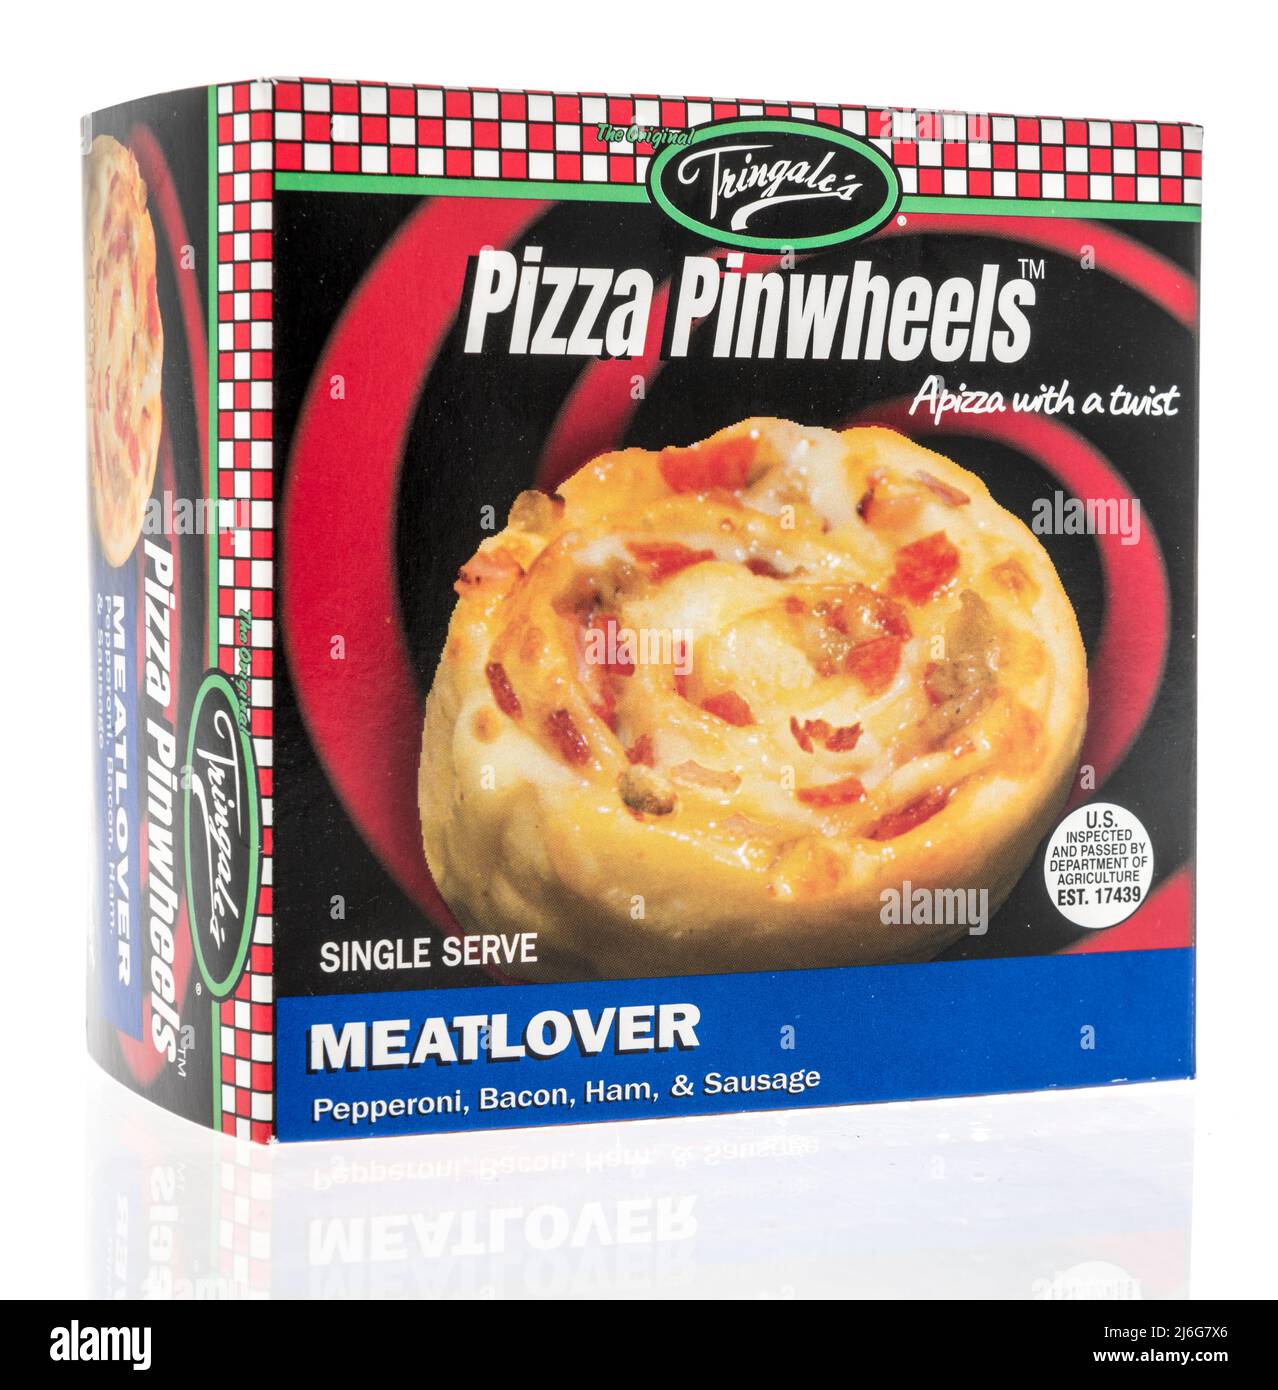 Winneconne, WI -23 April 2022: A package of Tringales pizza pinwheels meatlover pepperoni, bacon, ham, sausage on an isolated background Stock Photo